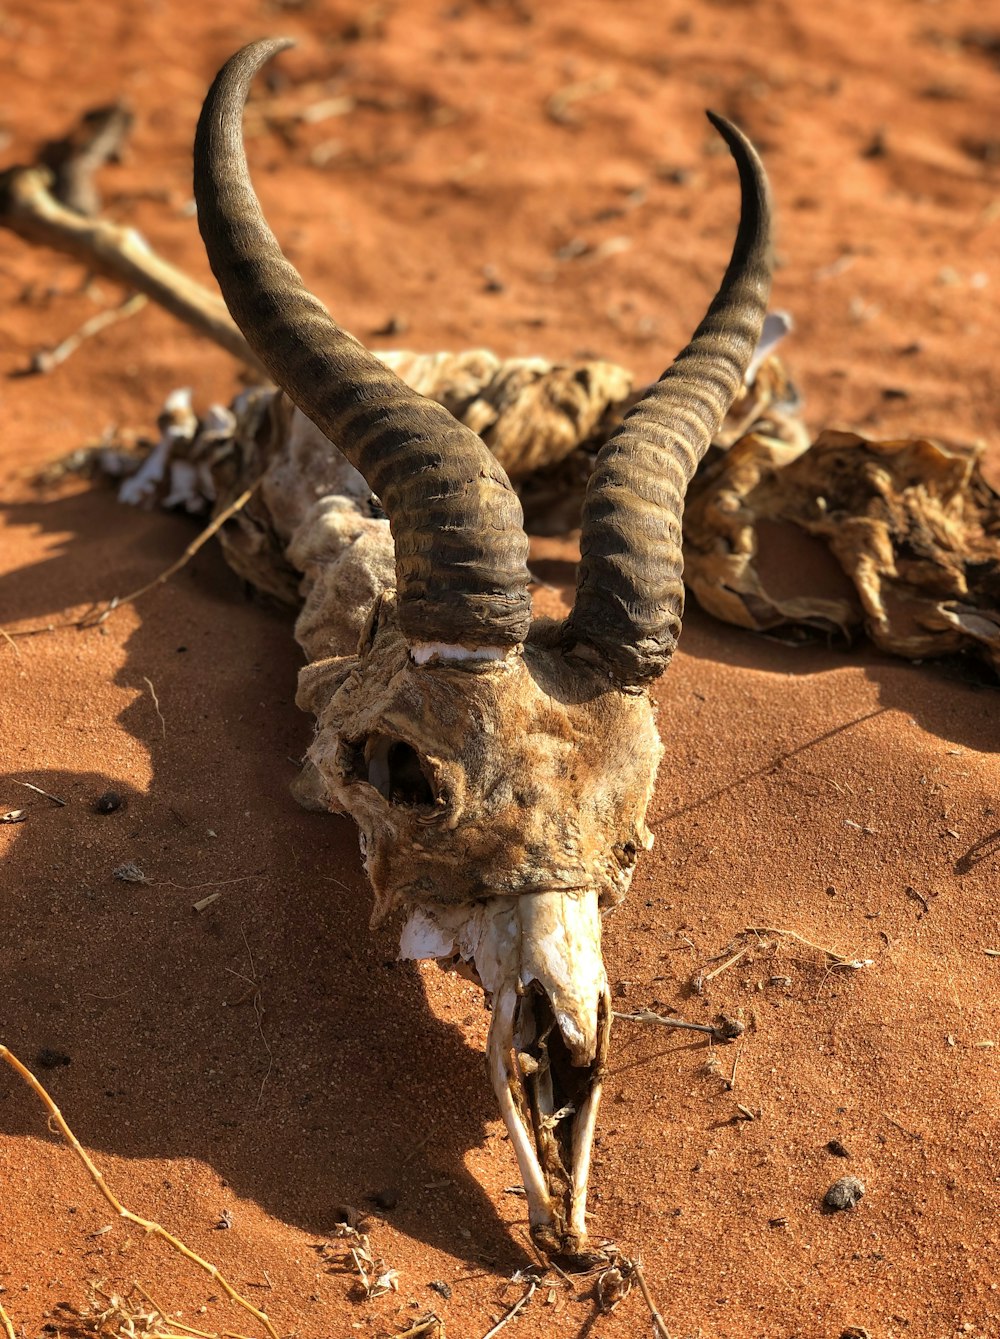 a horned animal with long horns laying on the ground